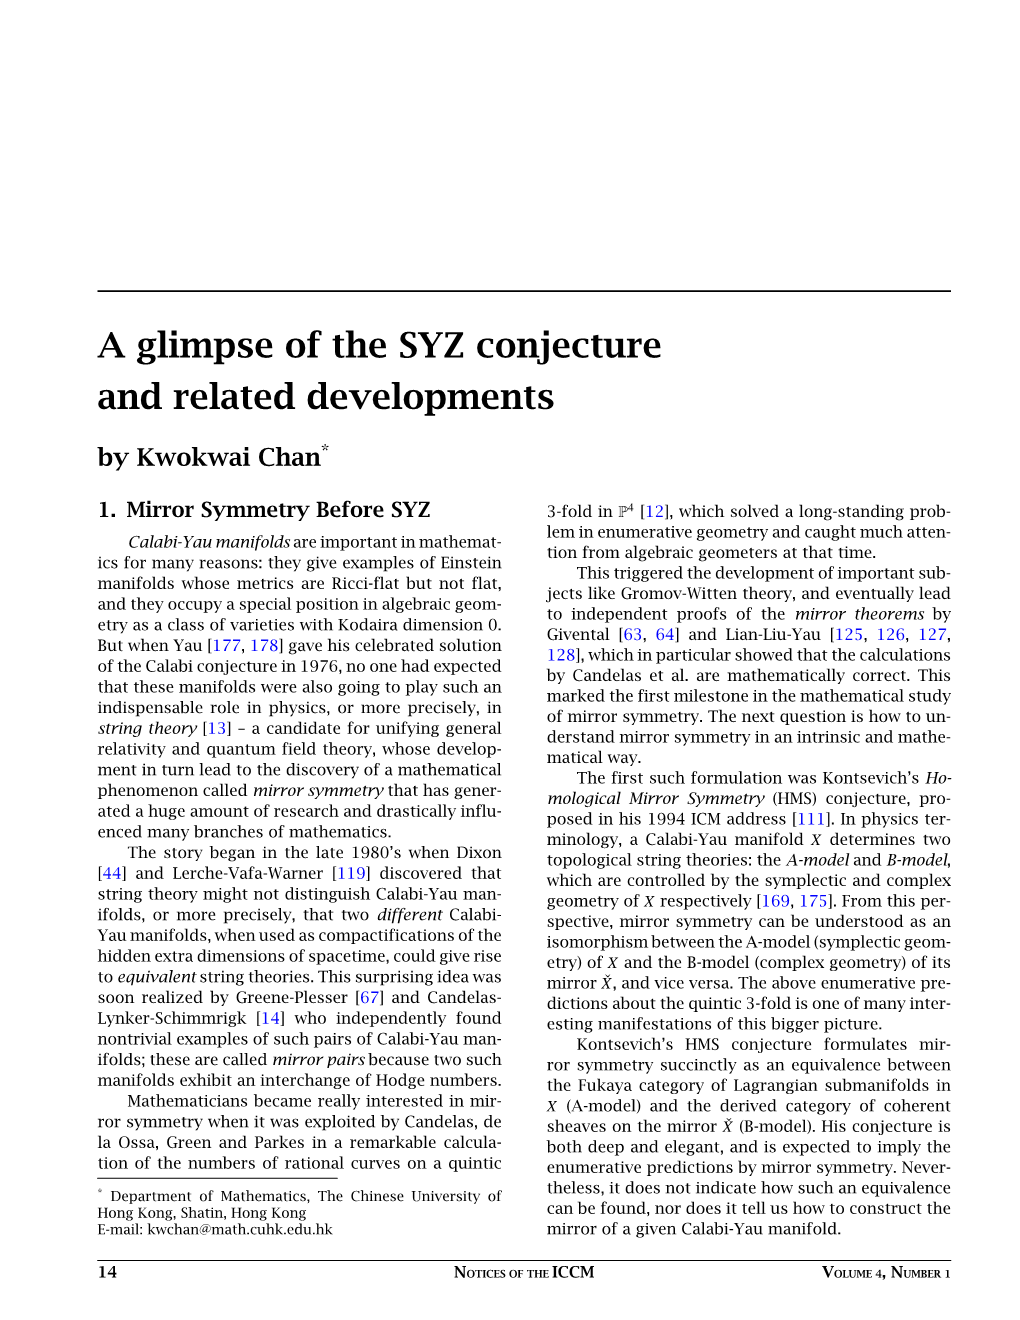 A Glimpse of the SYZ Conjecture and Related Developments by Kwokwai Chan*